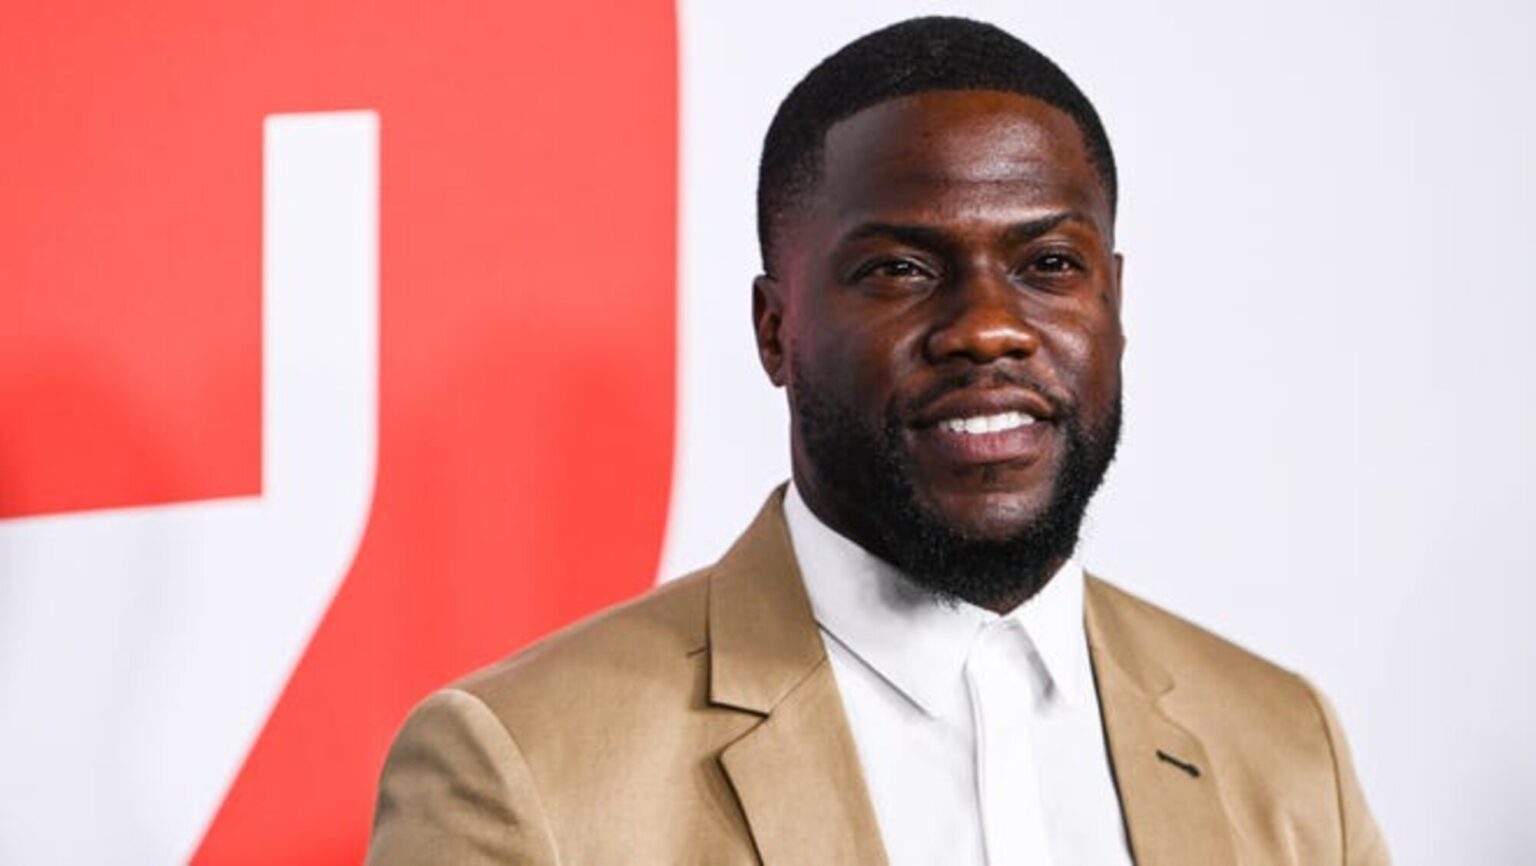 Kevin Hart was once the target of cancel culture and now he's sticking up for others who are being targeted. Has this affected his net worth?